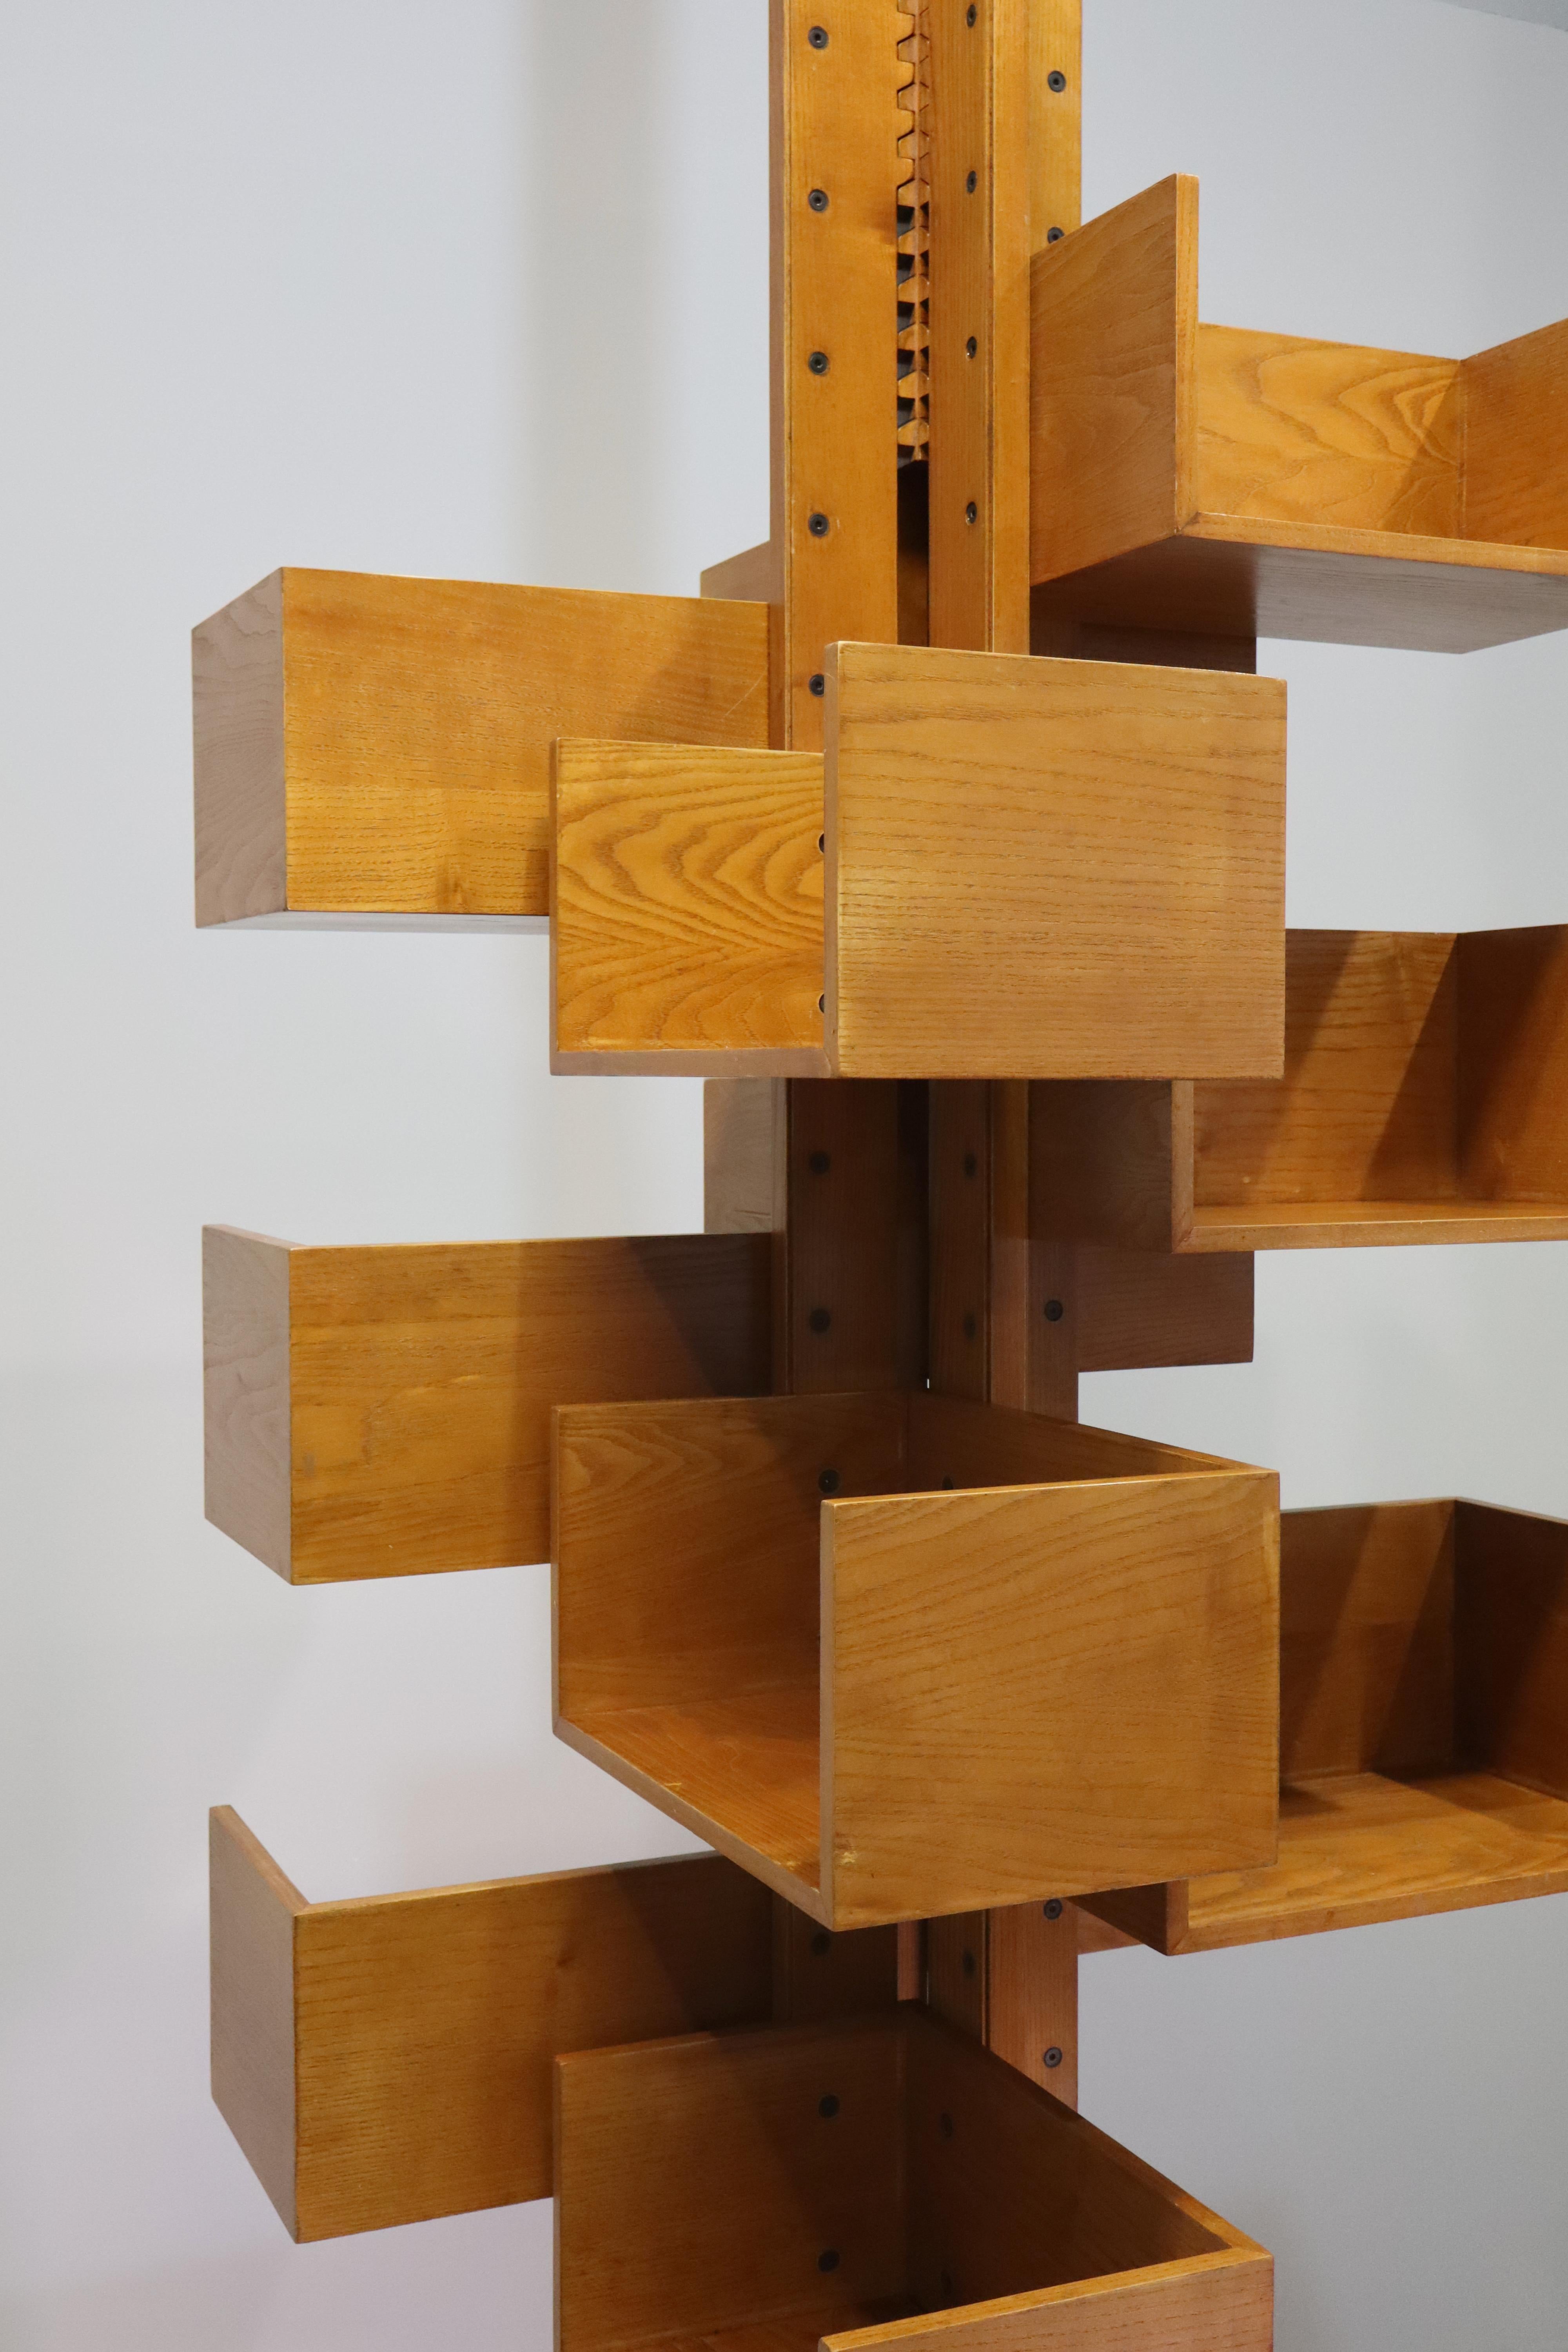 The 12-shelf Albero bookcase designed by  Gianfranco Frattini for Poltrona Frau   It has four vertical posts and two rack posts at either end, all made of solid ash. The shelves, with ash veneer, can be placed in the holes along the uprights as